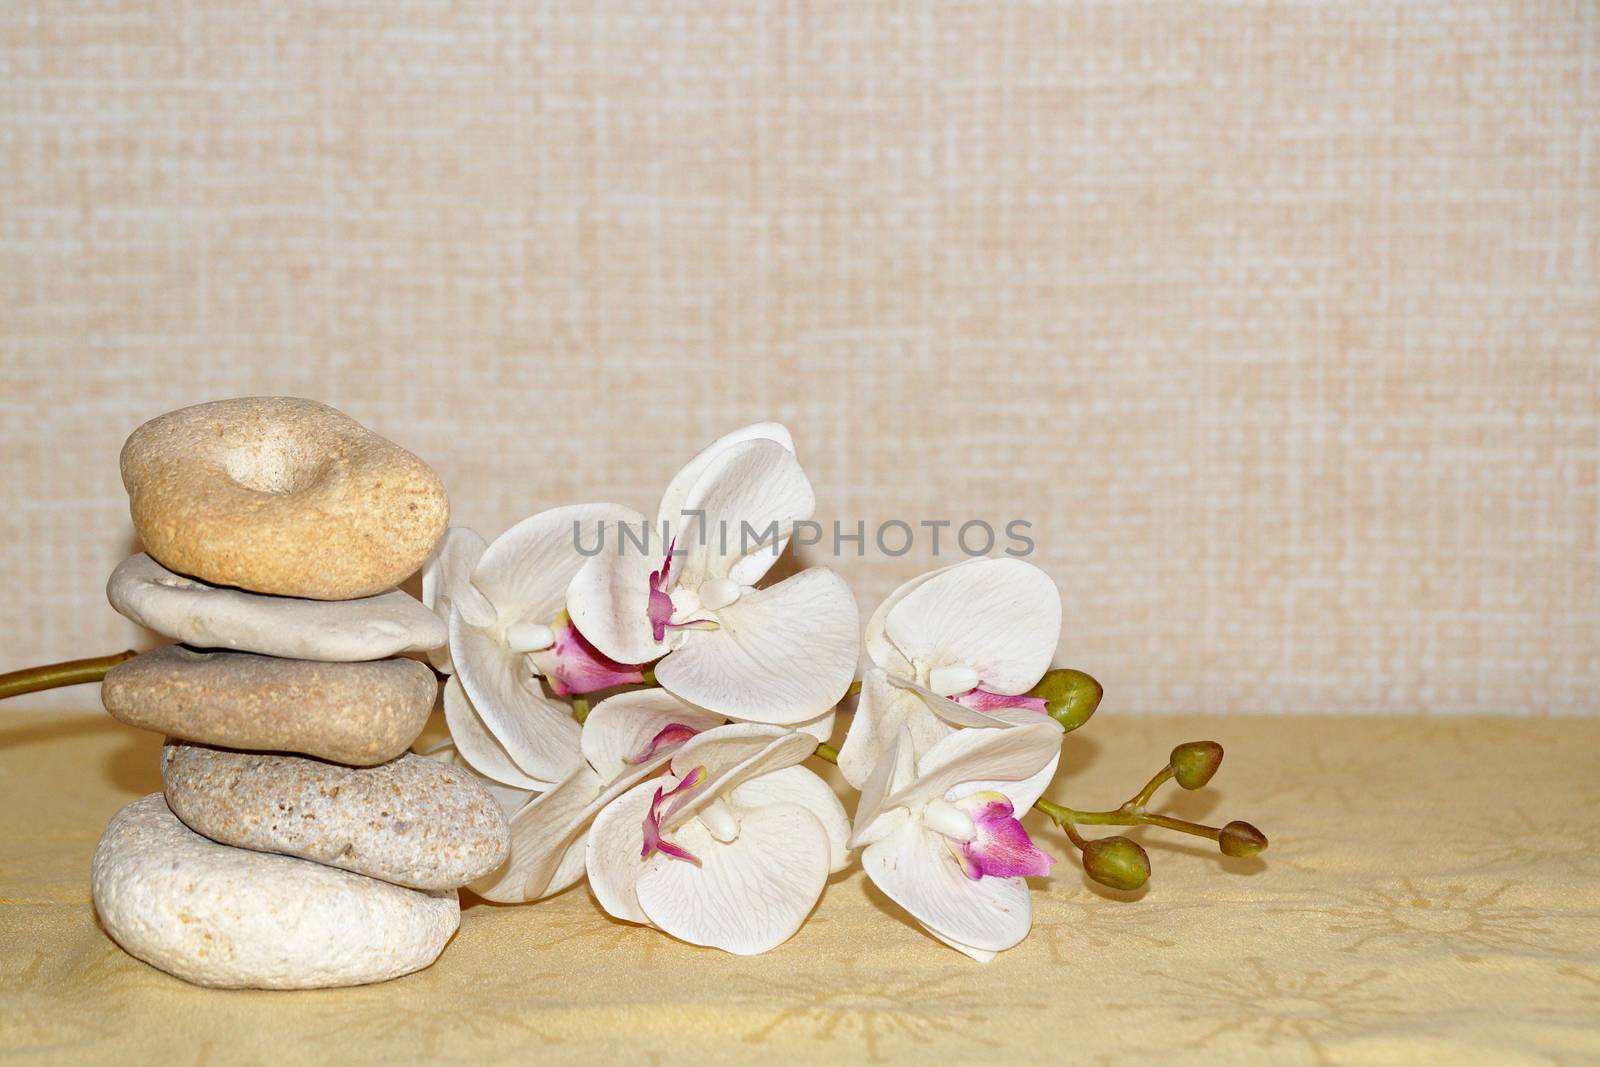 white orchid flower and natural stone pyramid close-up, relaxing zen background